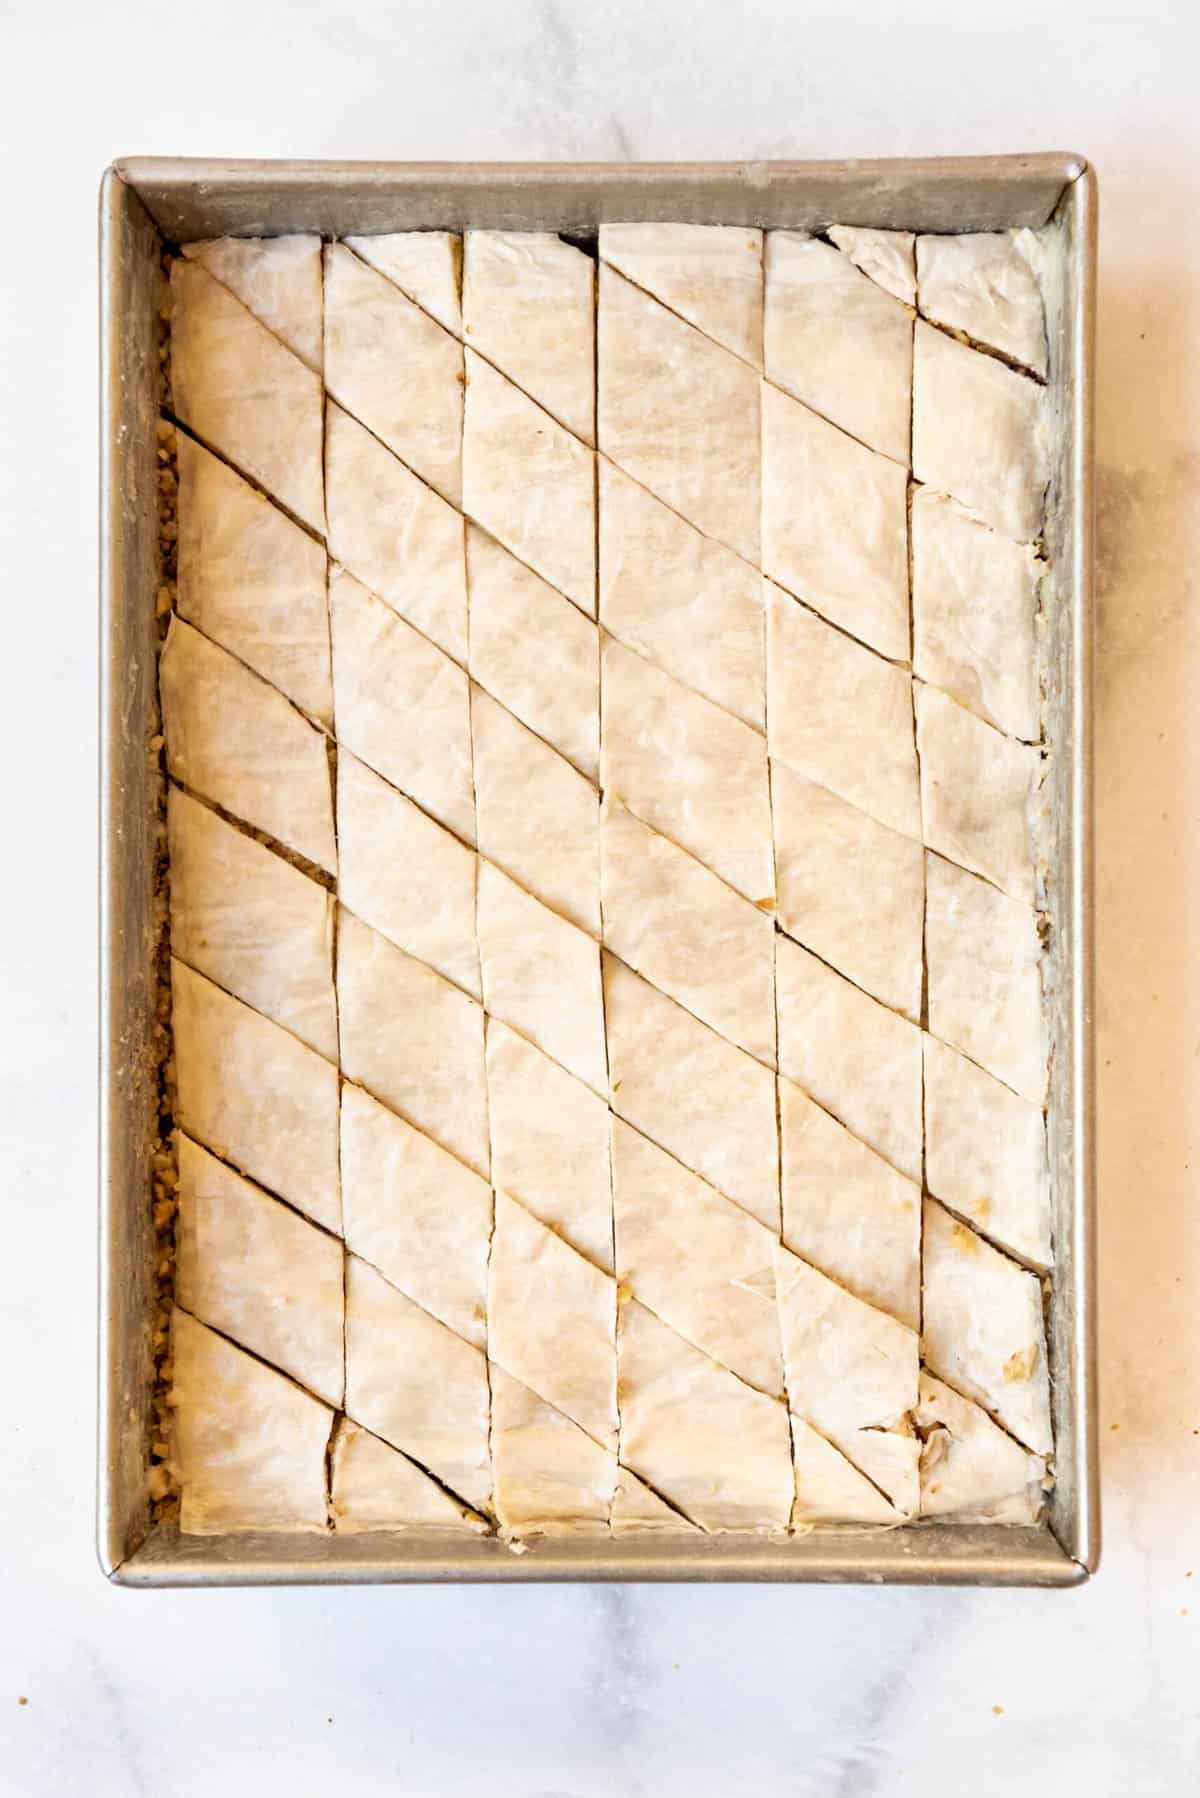 Diagonal lines cut into unbaked baklava to create diamond shapes.